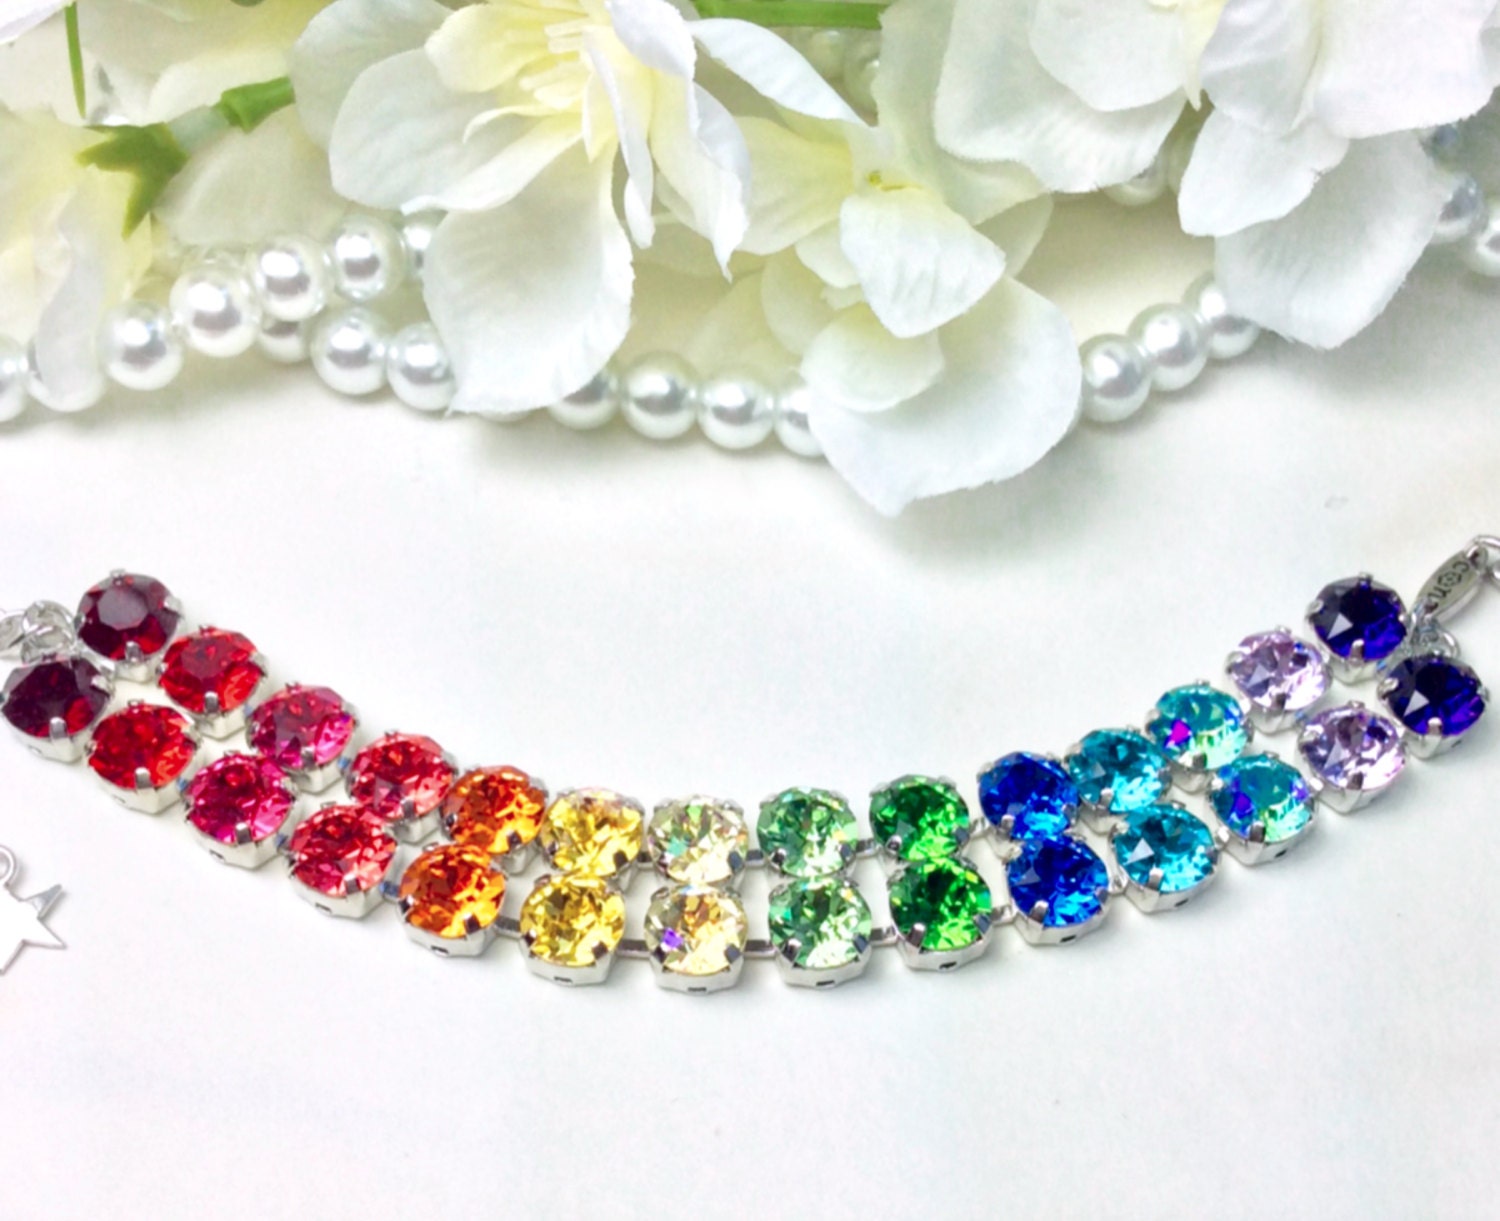 Swarovski Crystal 8.5mm "Double Rainbow" Bracelet - Two Rows of Beautiful Rainbow Colors - Designer Inspired - FREE SHIPPING